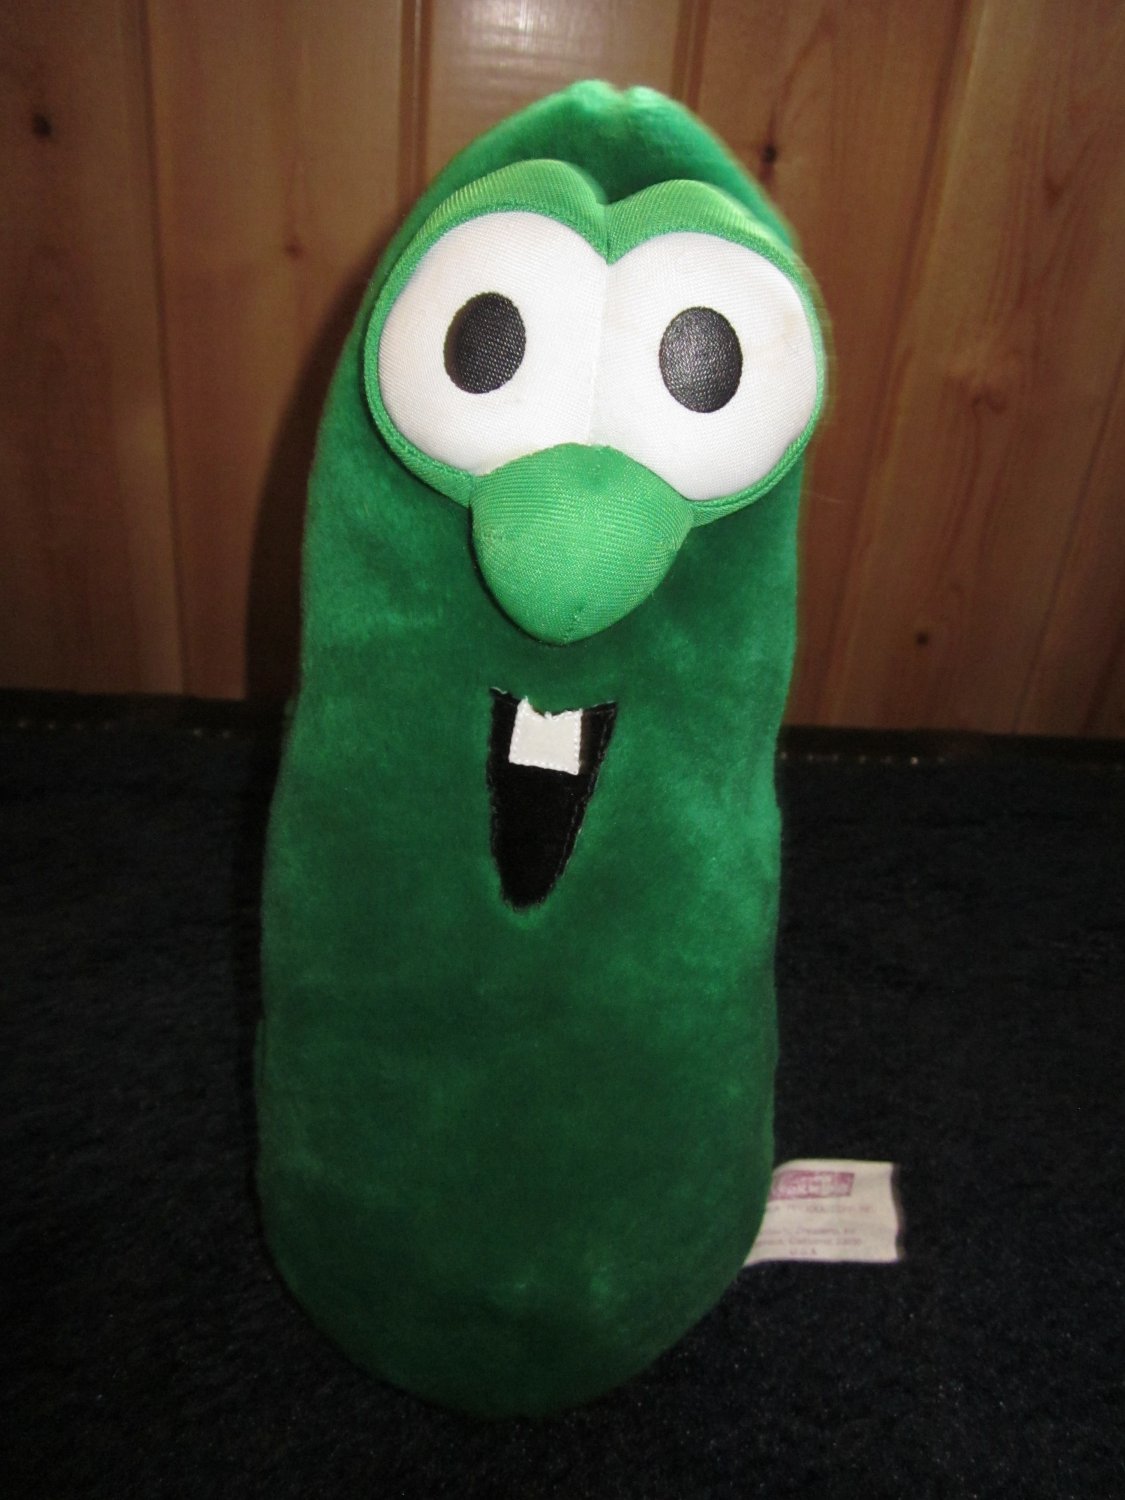 Plush Larry the Cucumber from Veggie Tales